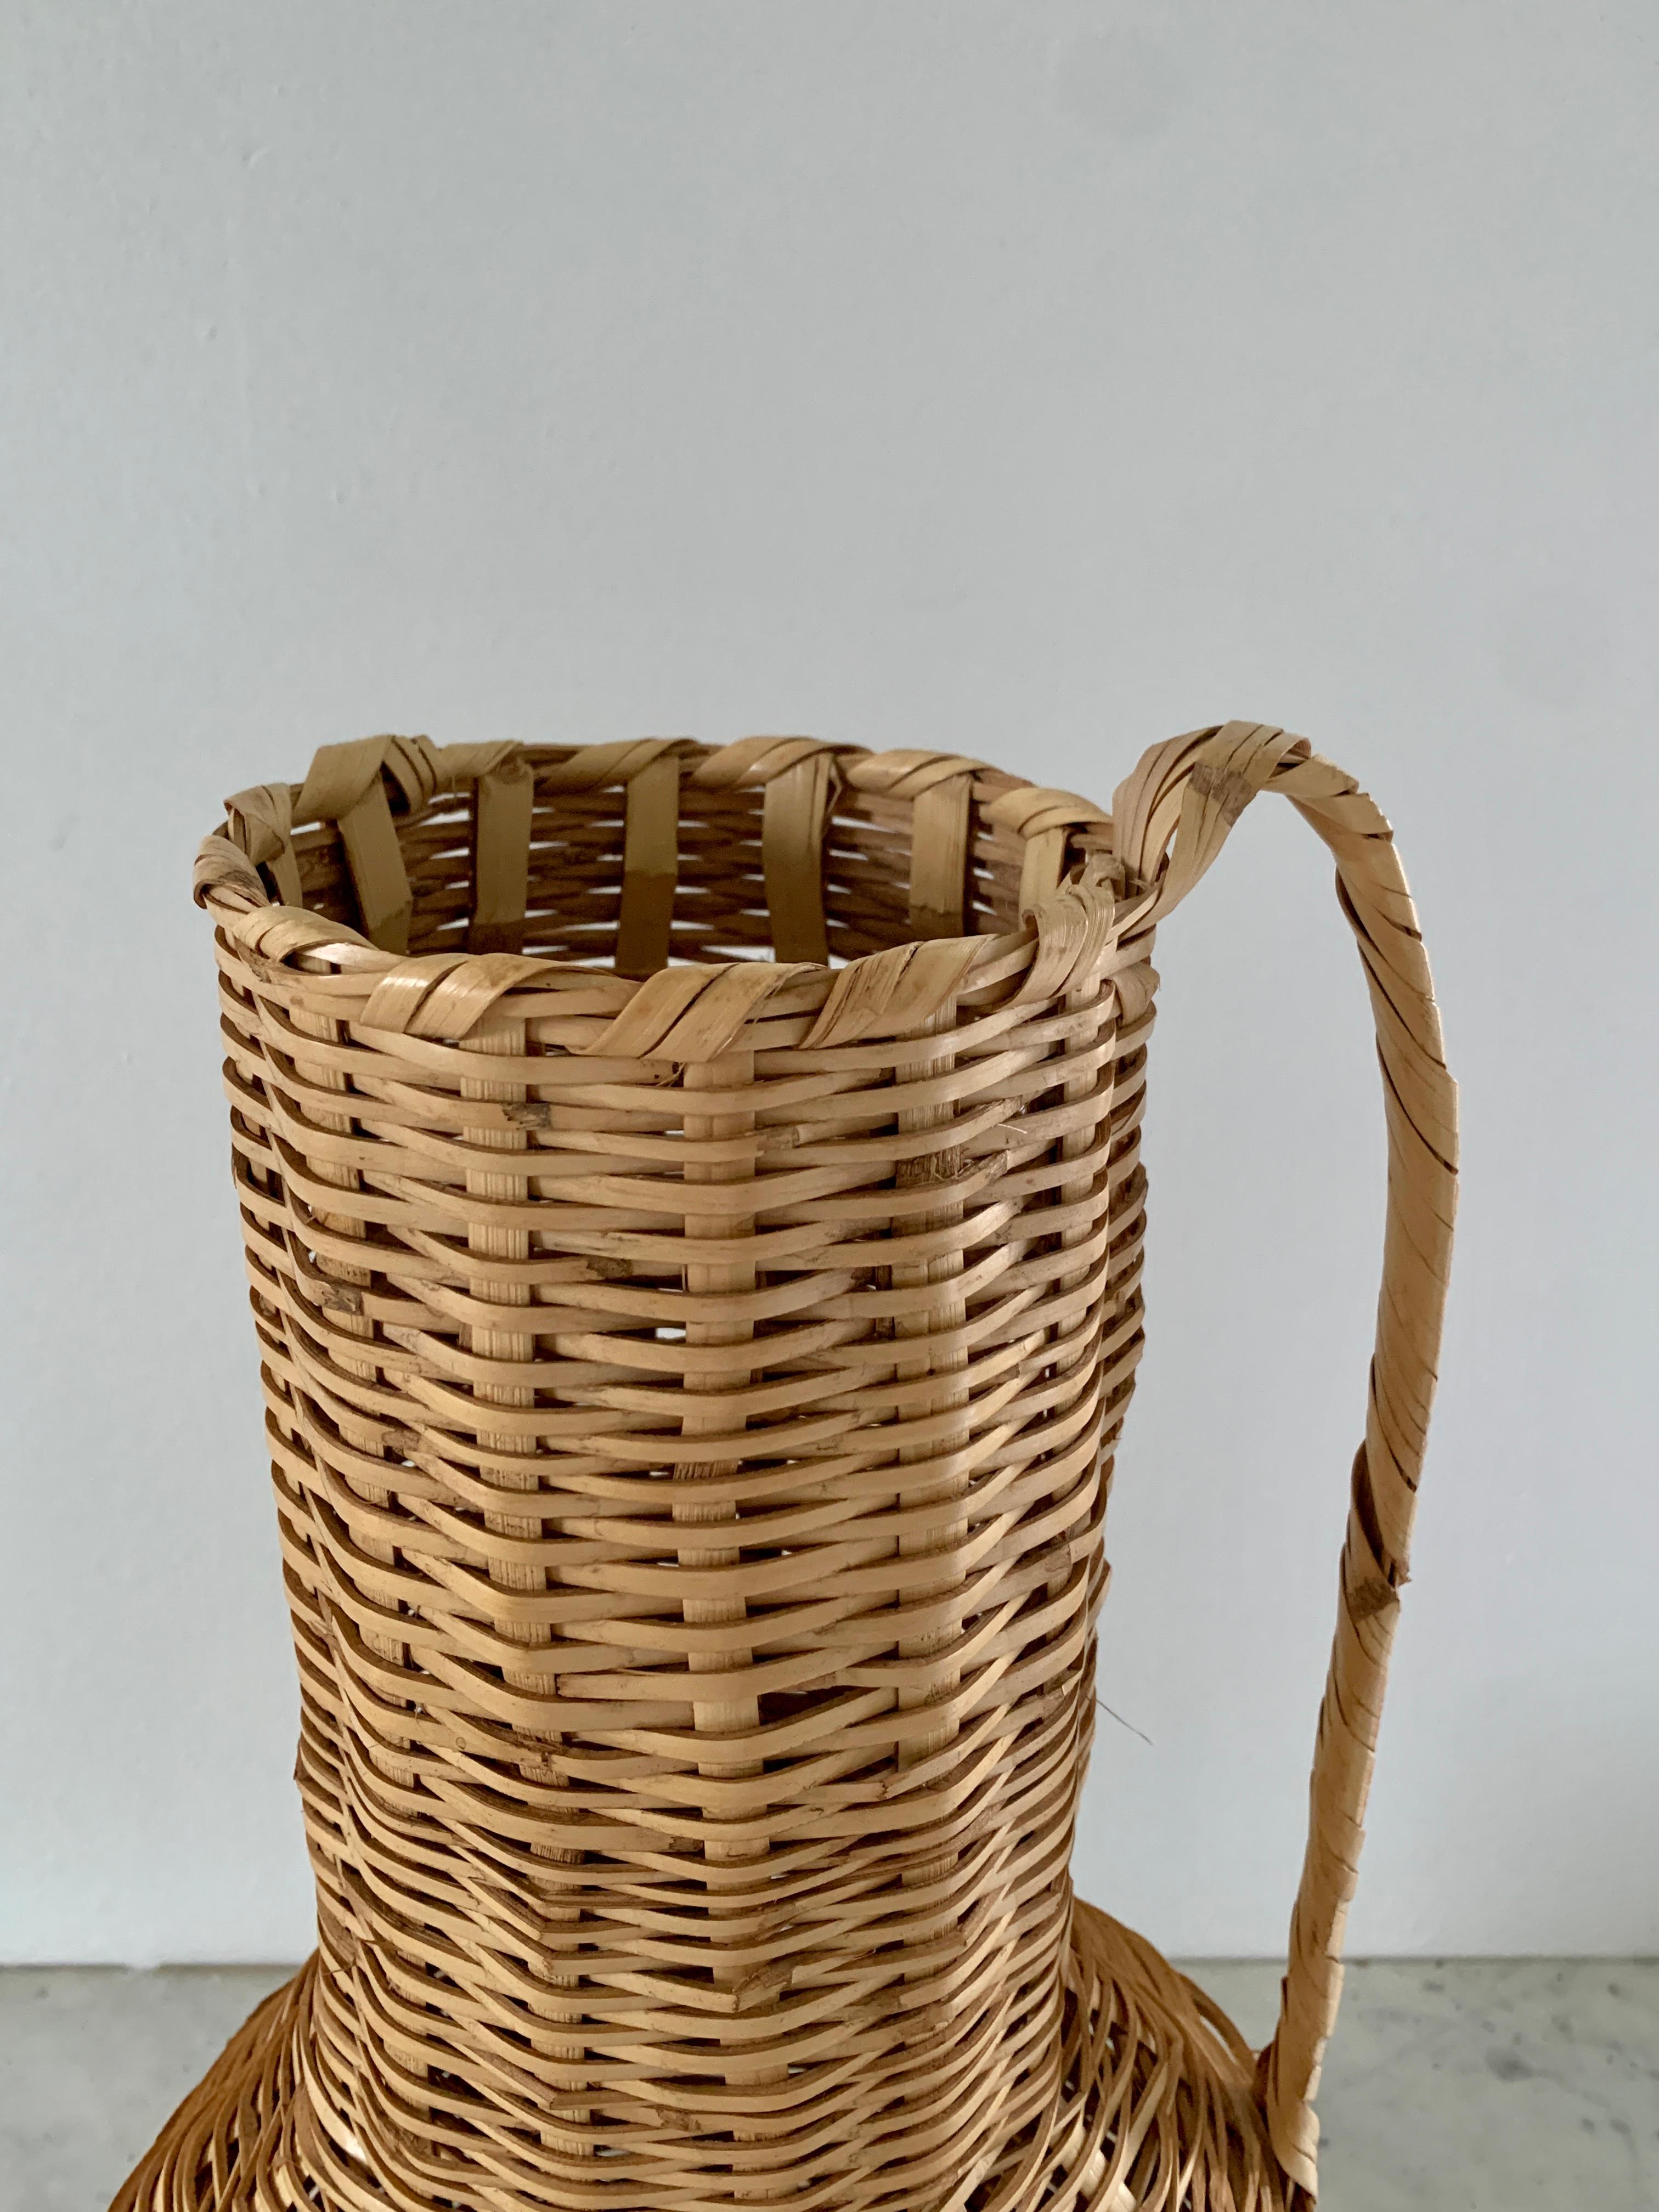 A charming Boho Chic woven wicker basket in the form of a vase with a handle

Mexico, circa 1980s

Measures: 8.5